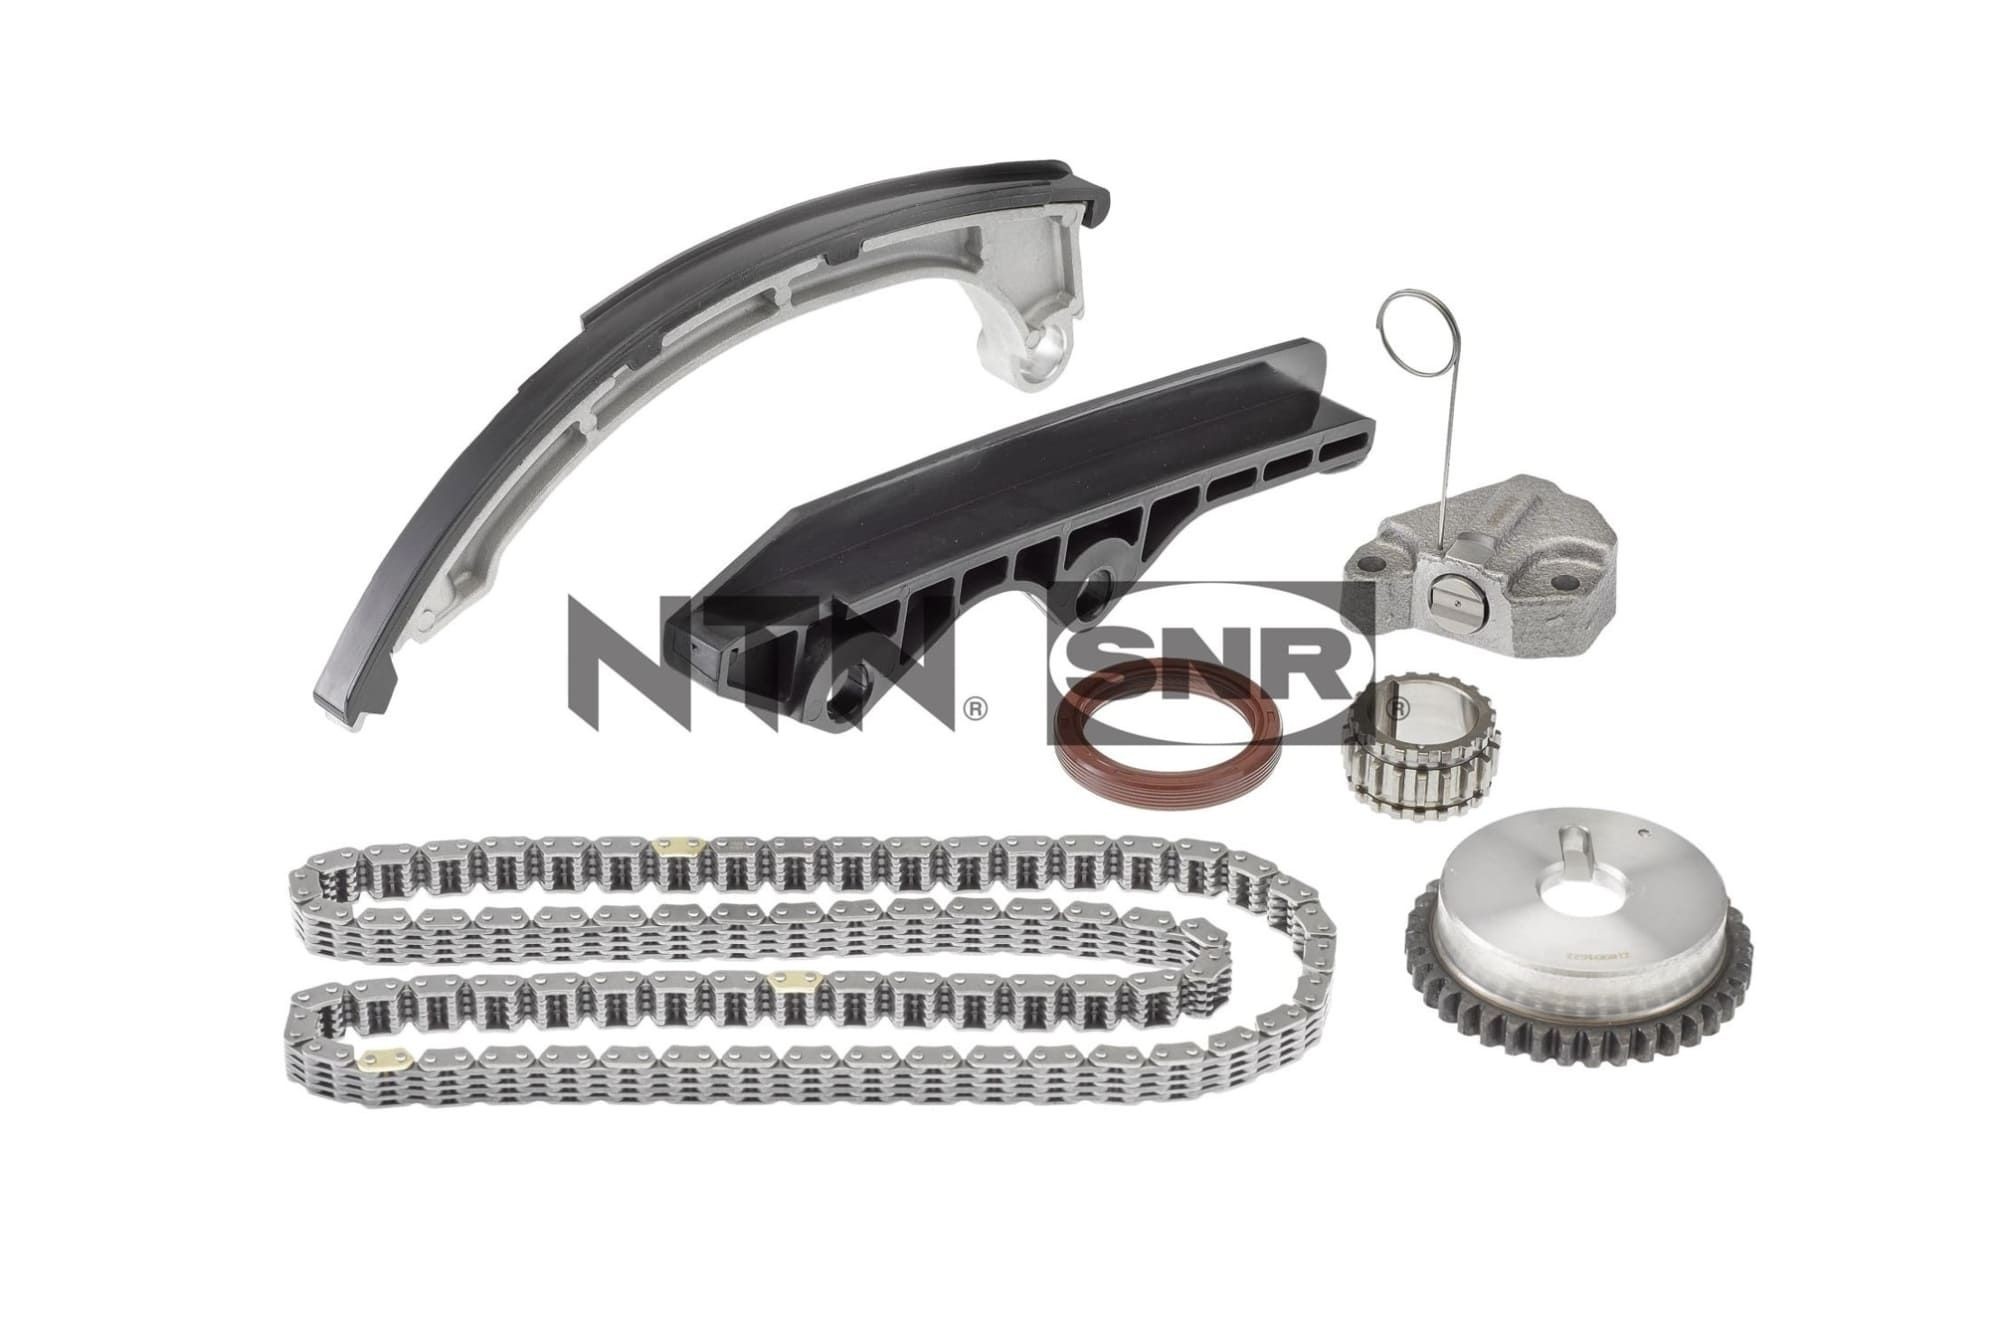 Original KDC468.02 SNR Timing chain kit experience and price